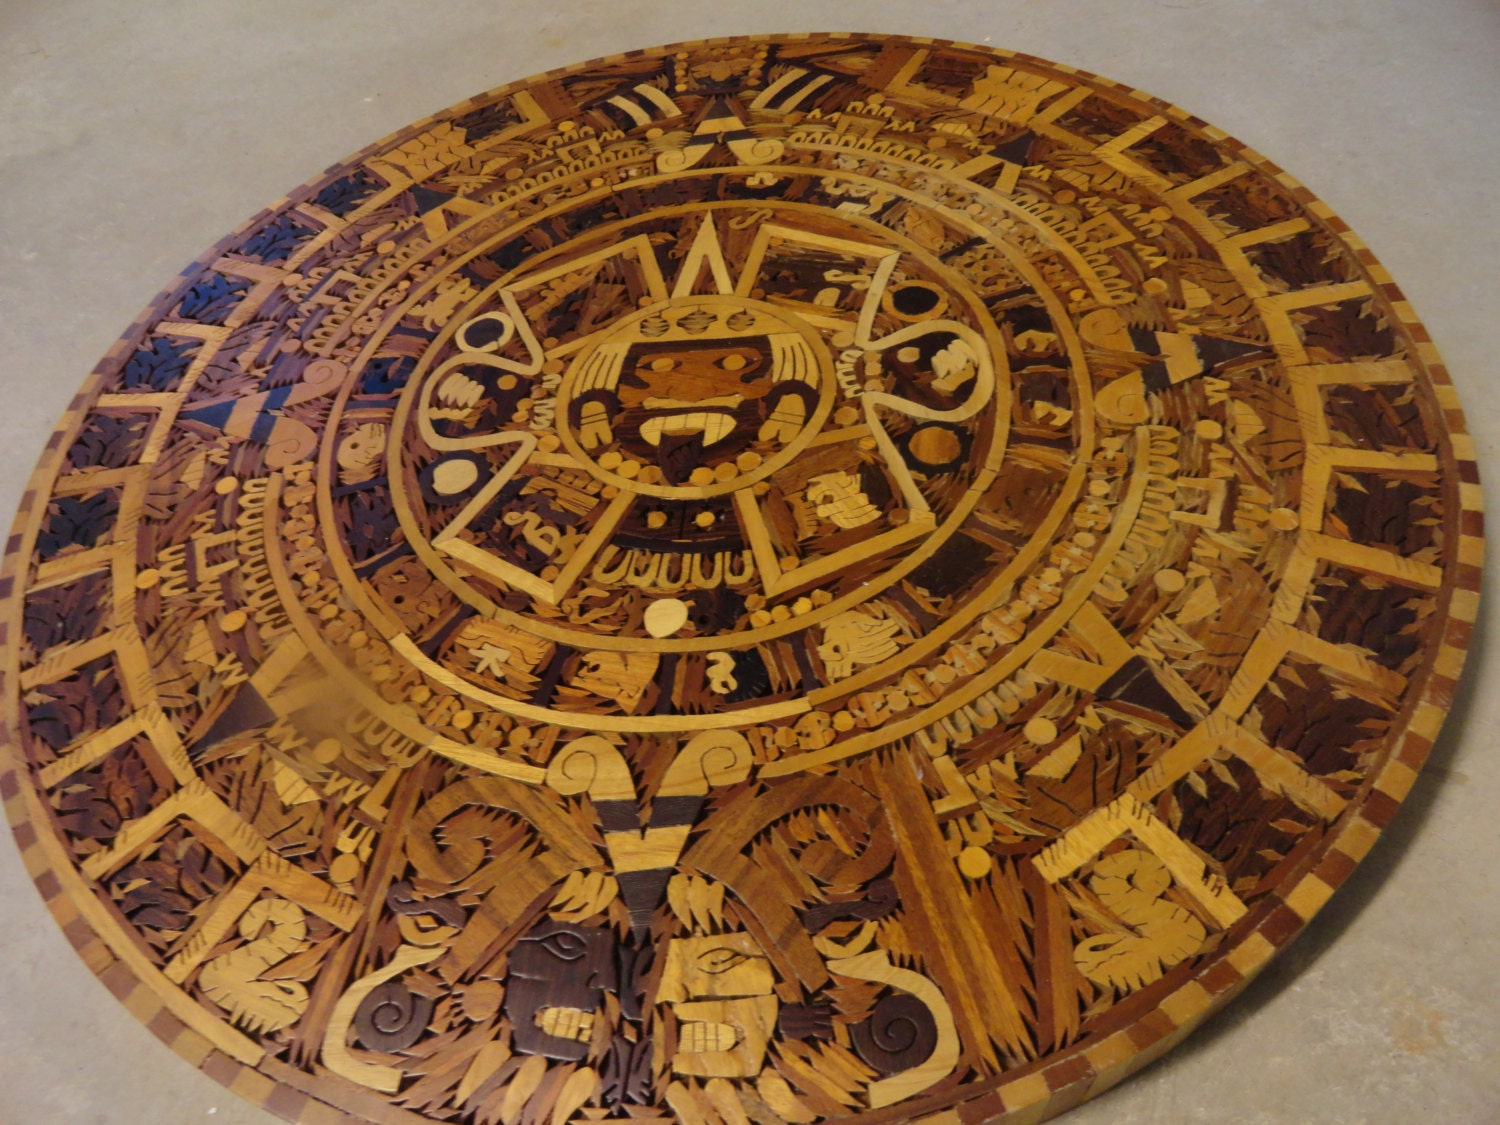 SALE Vintage AZTEC Calendar MARQUETRY Wood Inlay Wall Hanging